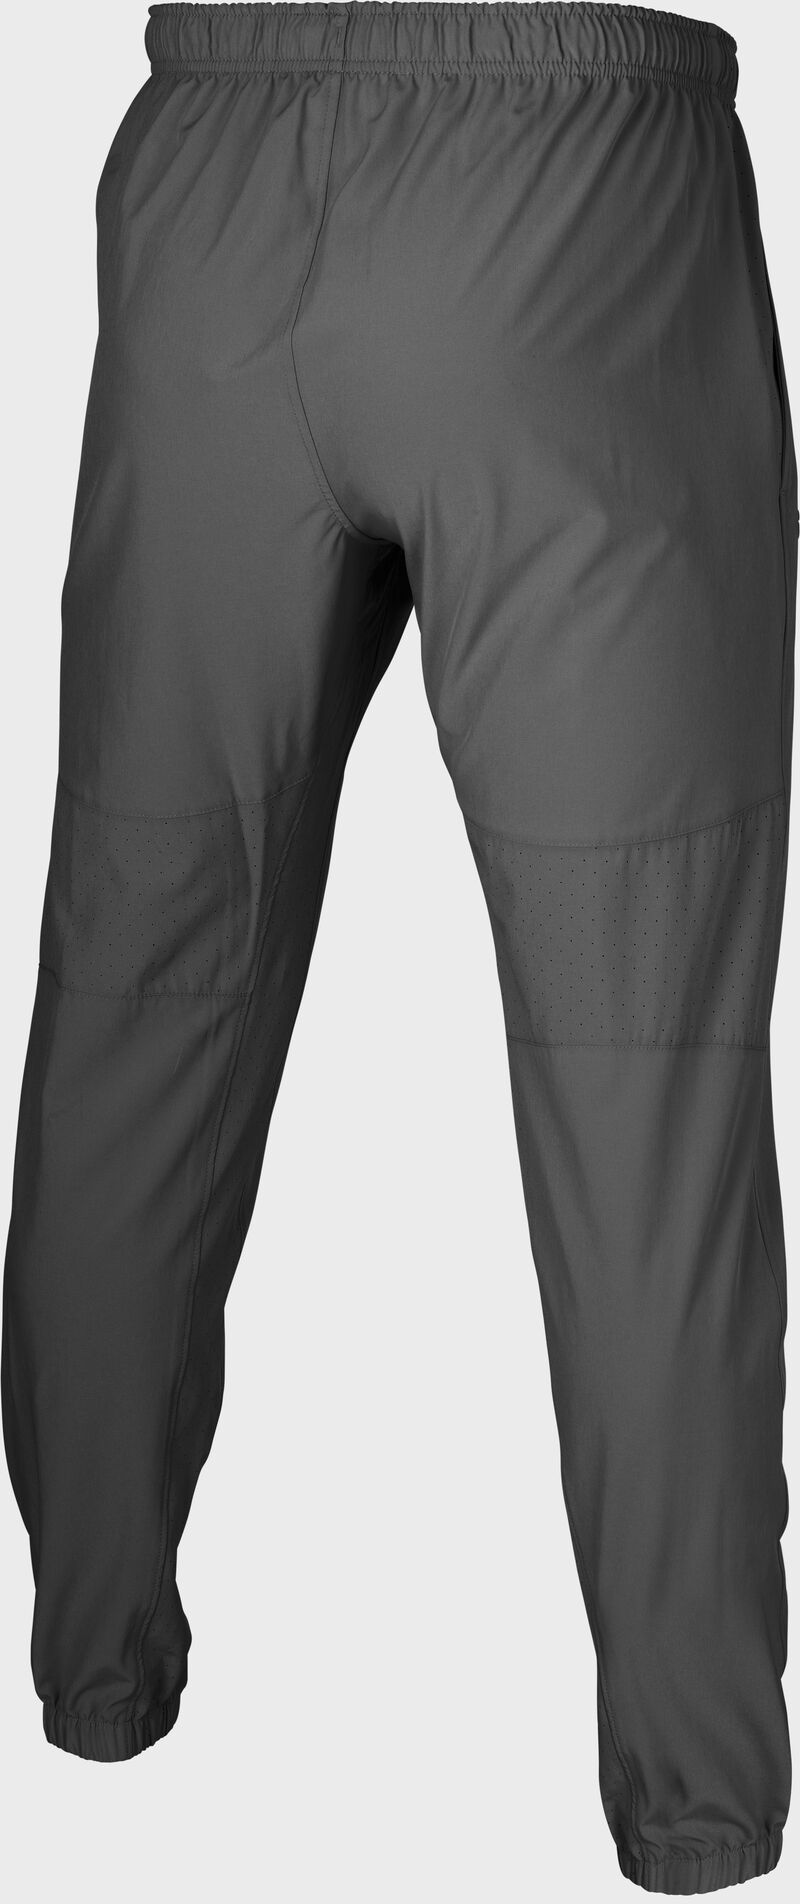 Adult Gameday Stretch Woven Pant loading=